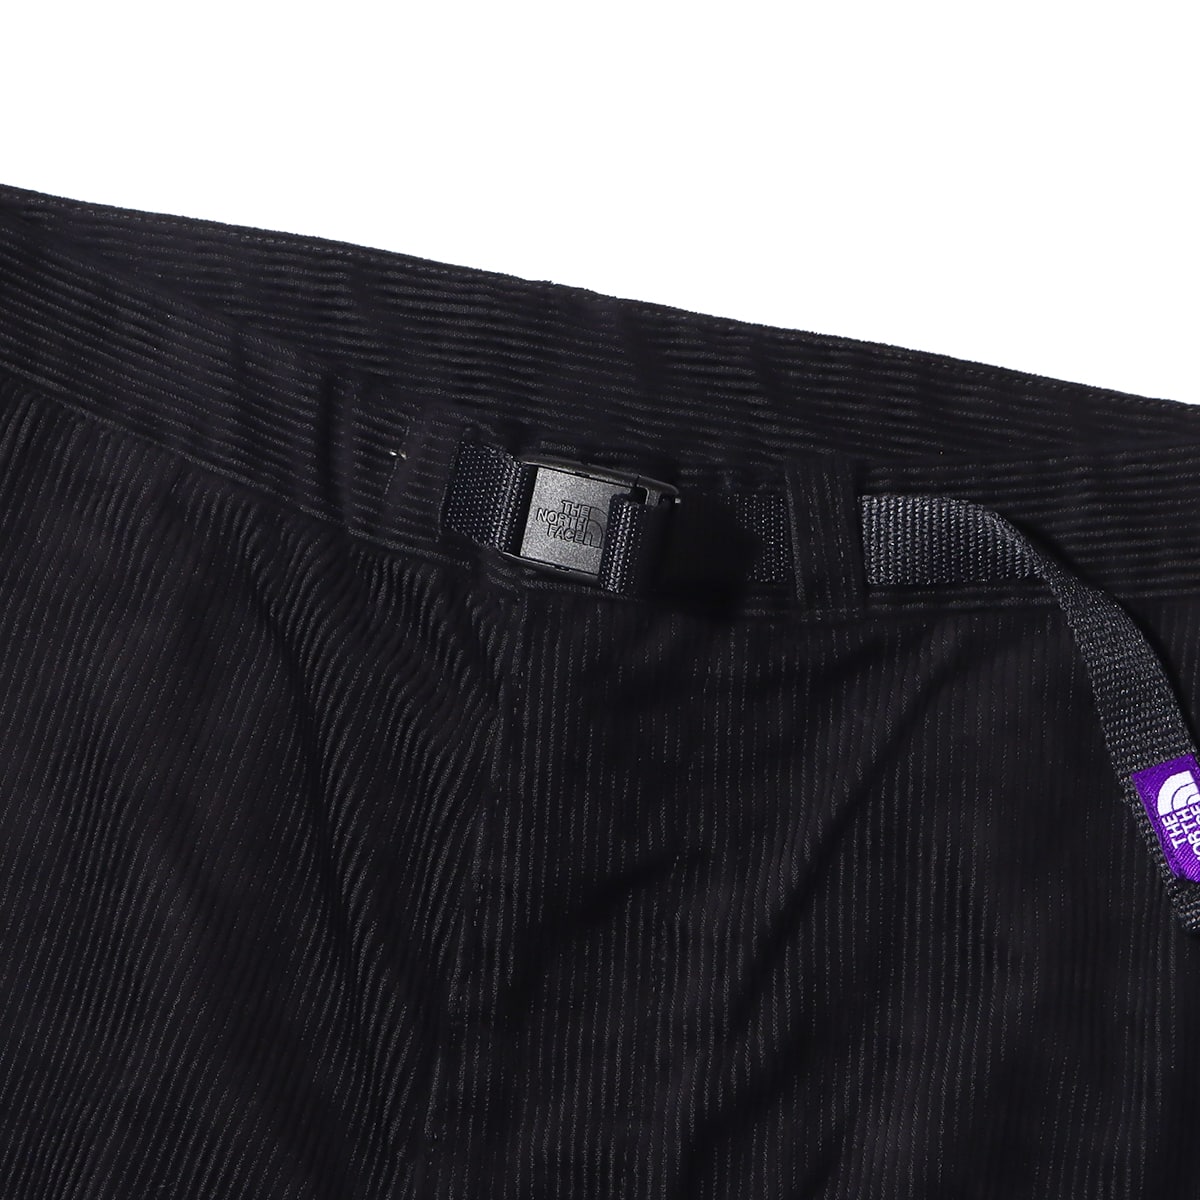 THE NORTH FACE PURPLE LABEL Corduroy Wide Tapered Pants Black 22FW-I